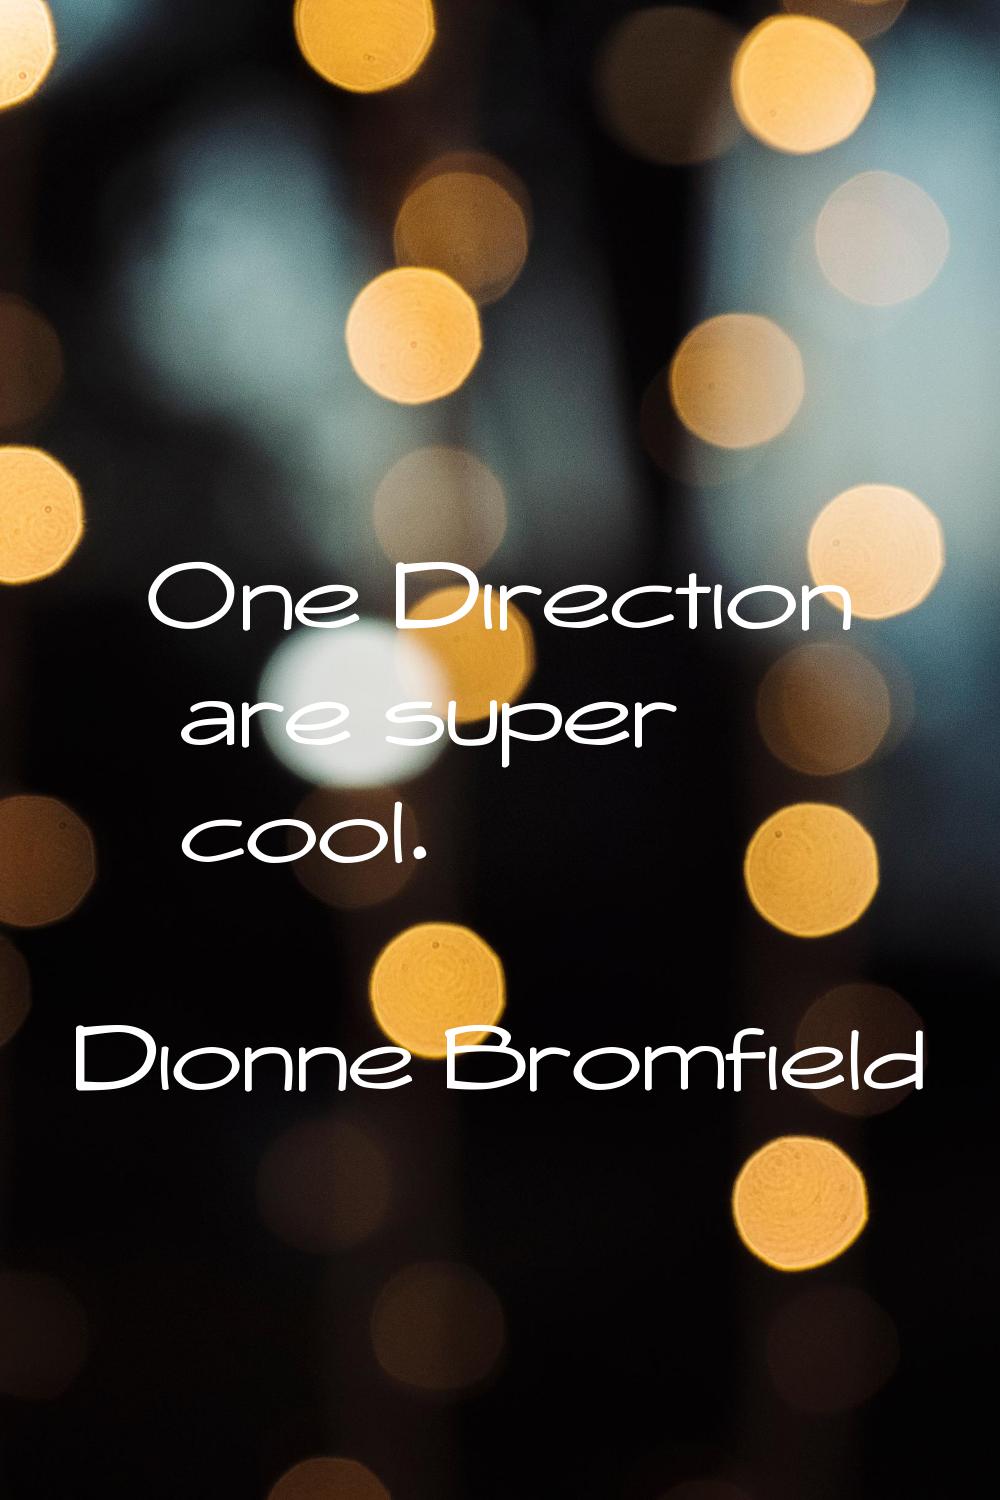 One Direction are super cool.